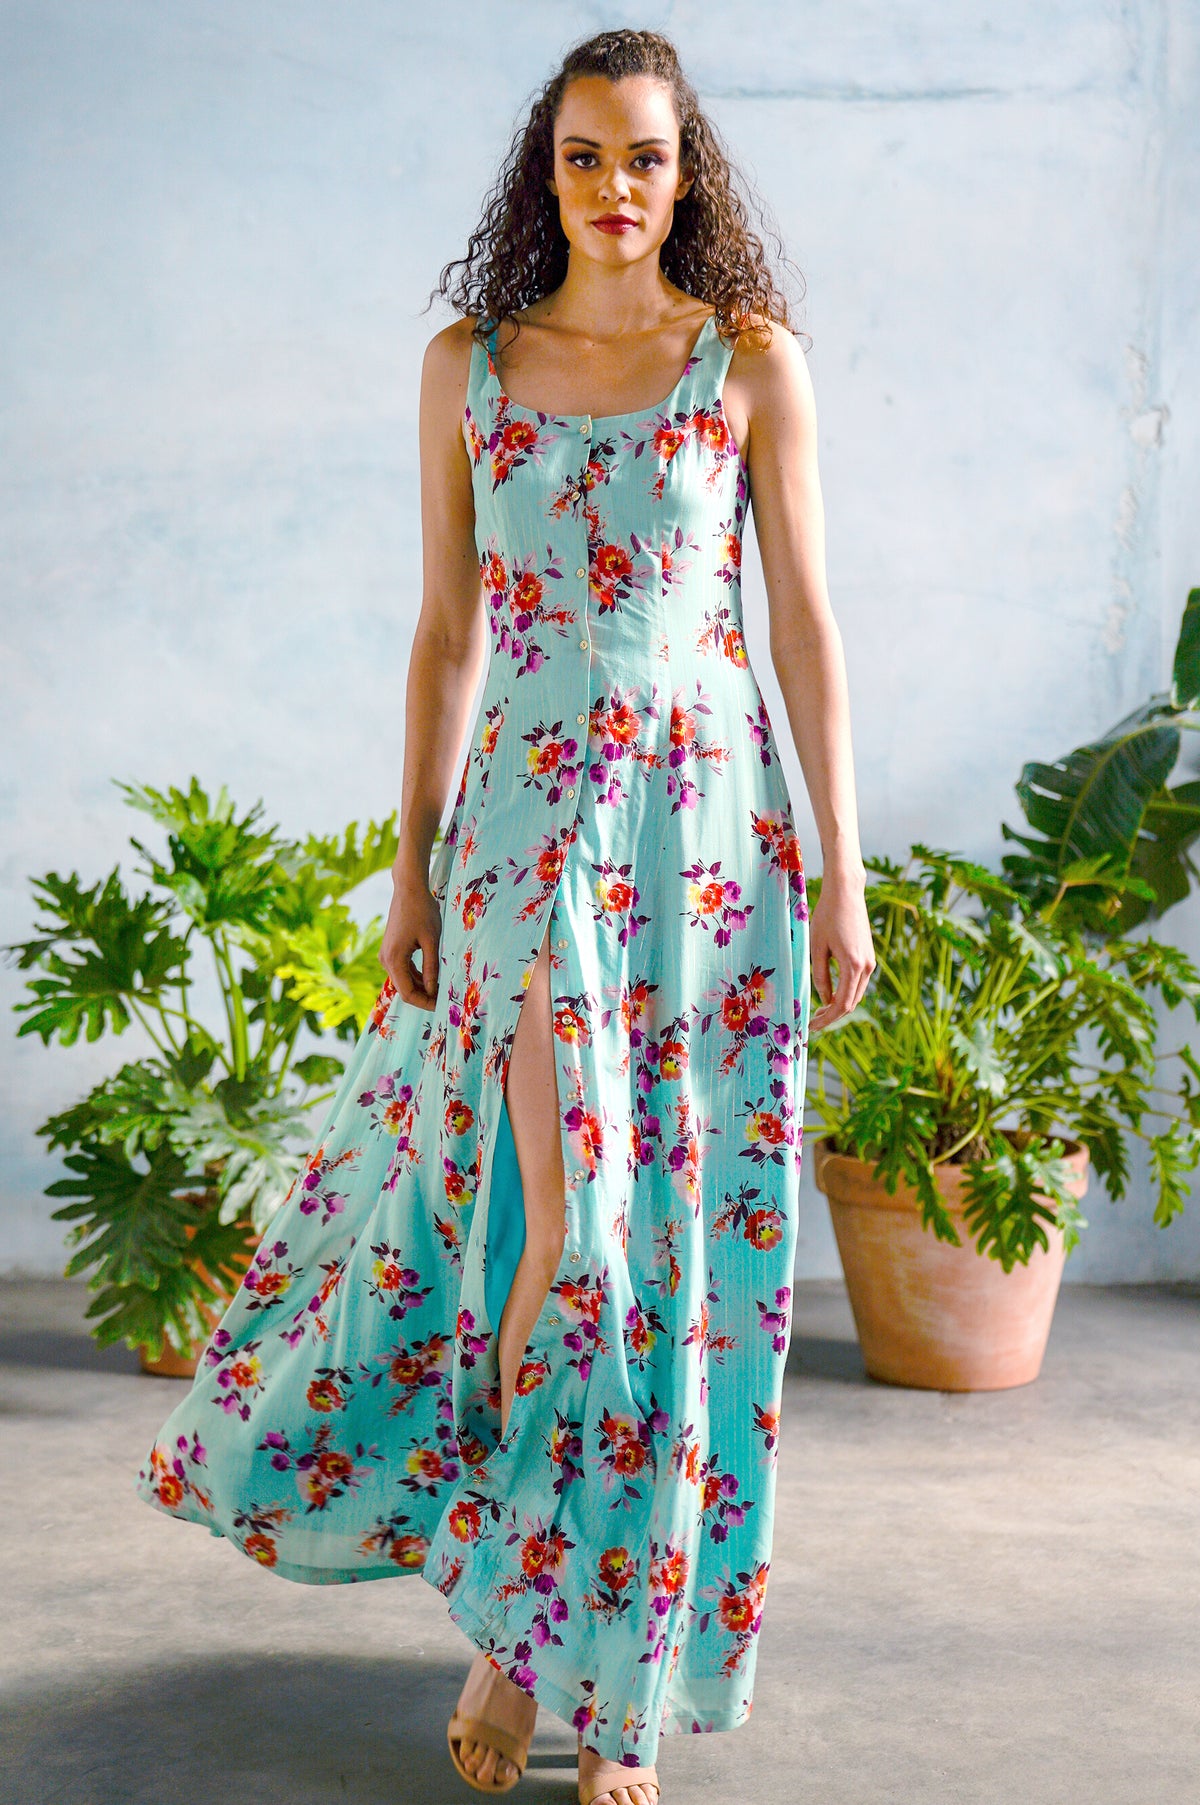 ANEESA Floral Cotton Maxi Dress with Button-Up Slit Details - Front View - Harleen Kaur